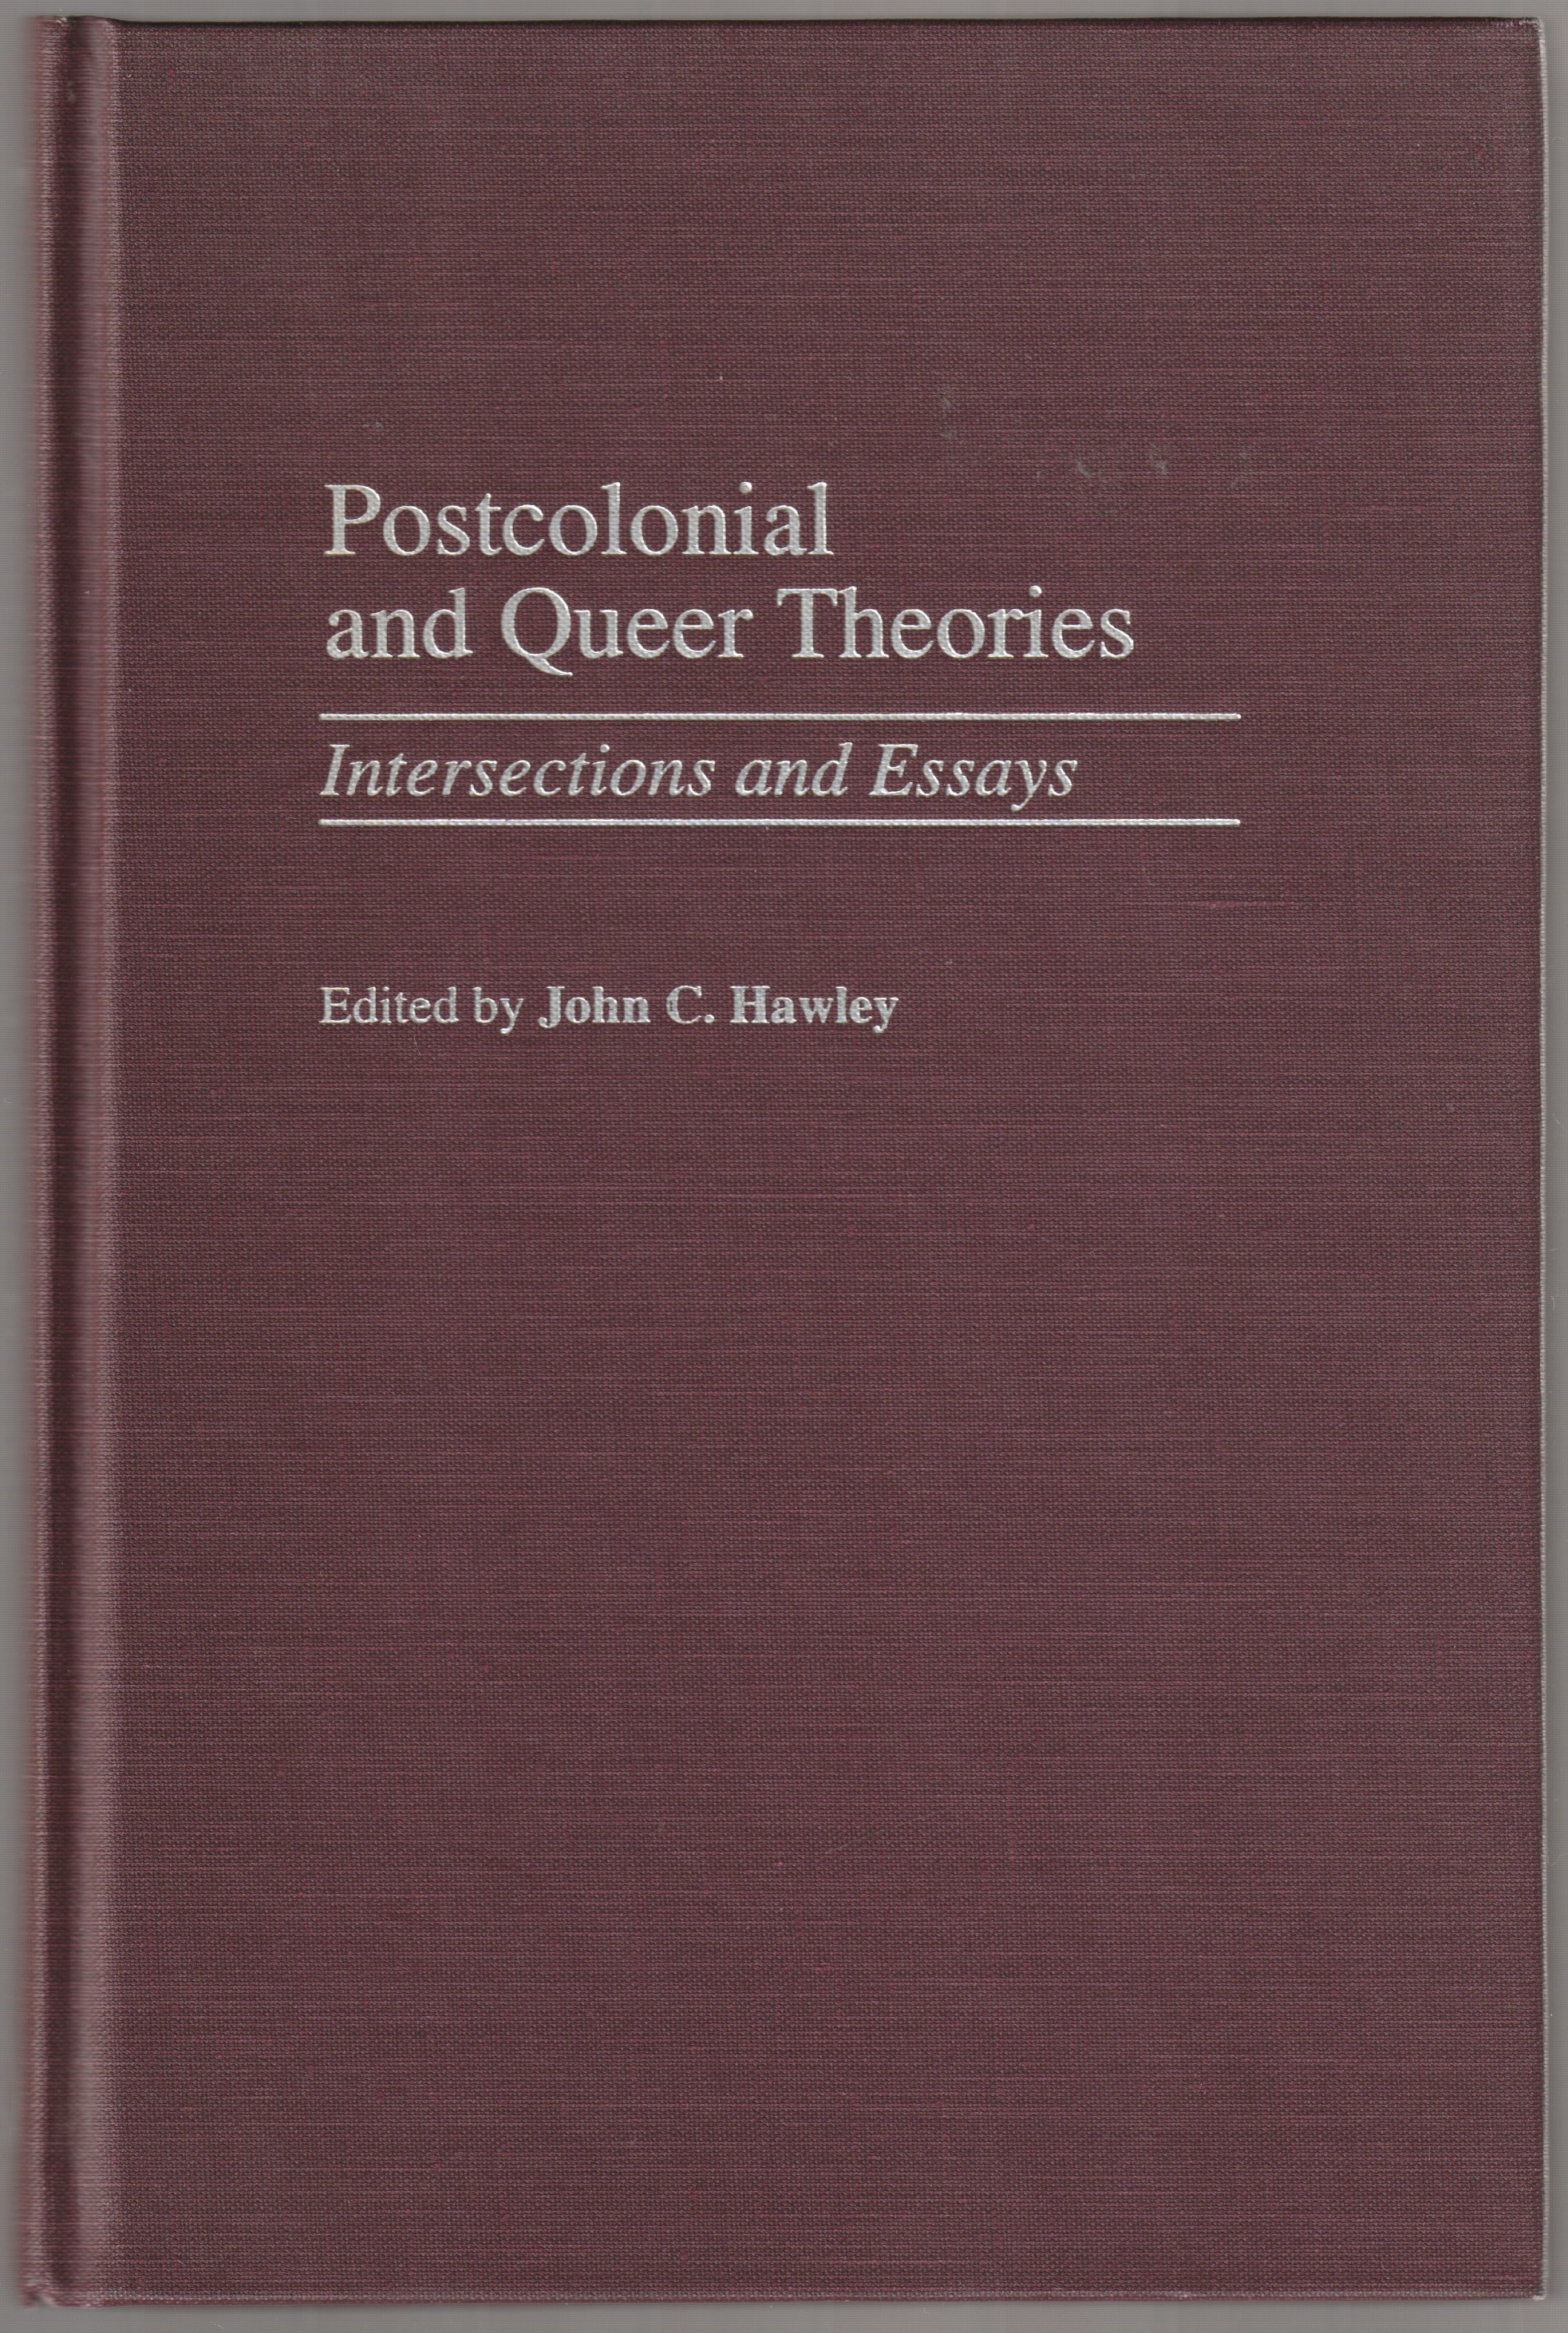 Postcolonial and queer theories : intersections and essays.